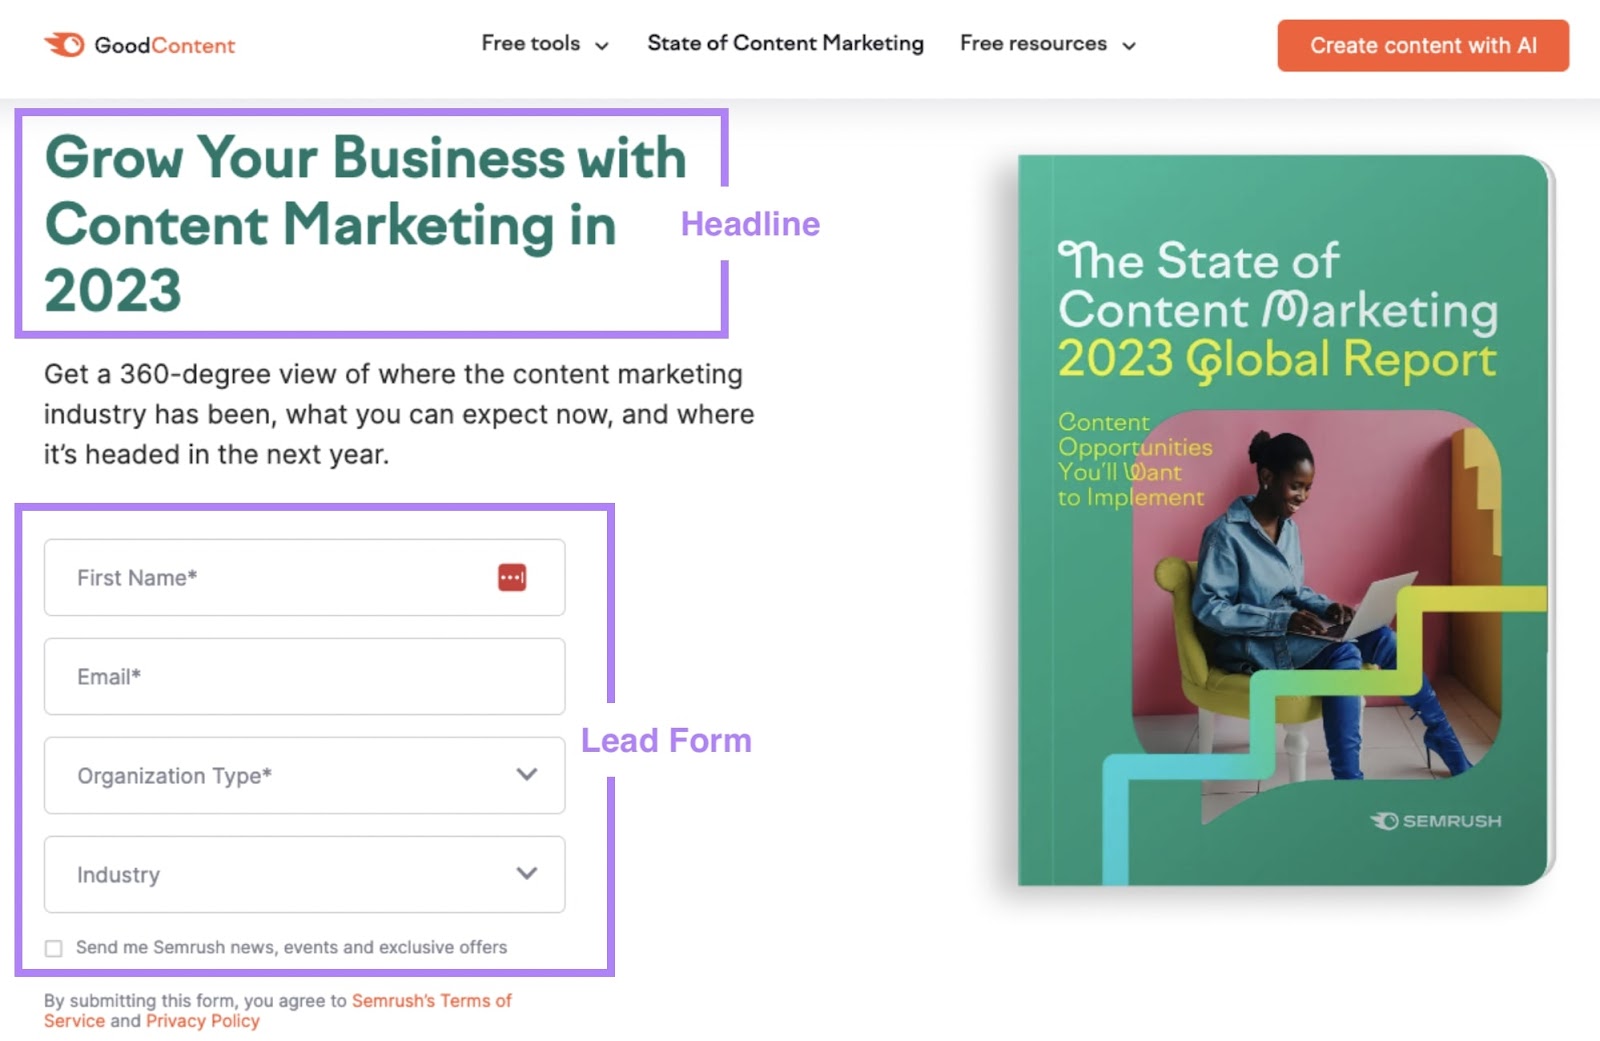 Semrush 'The State of Content Marketing 2023 Global Report' landing page with compelling headline and lead form